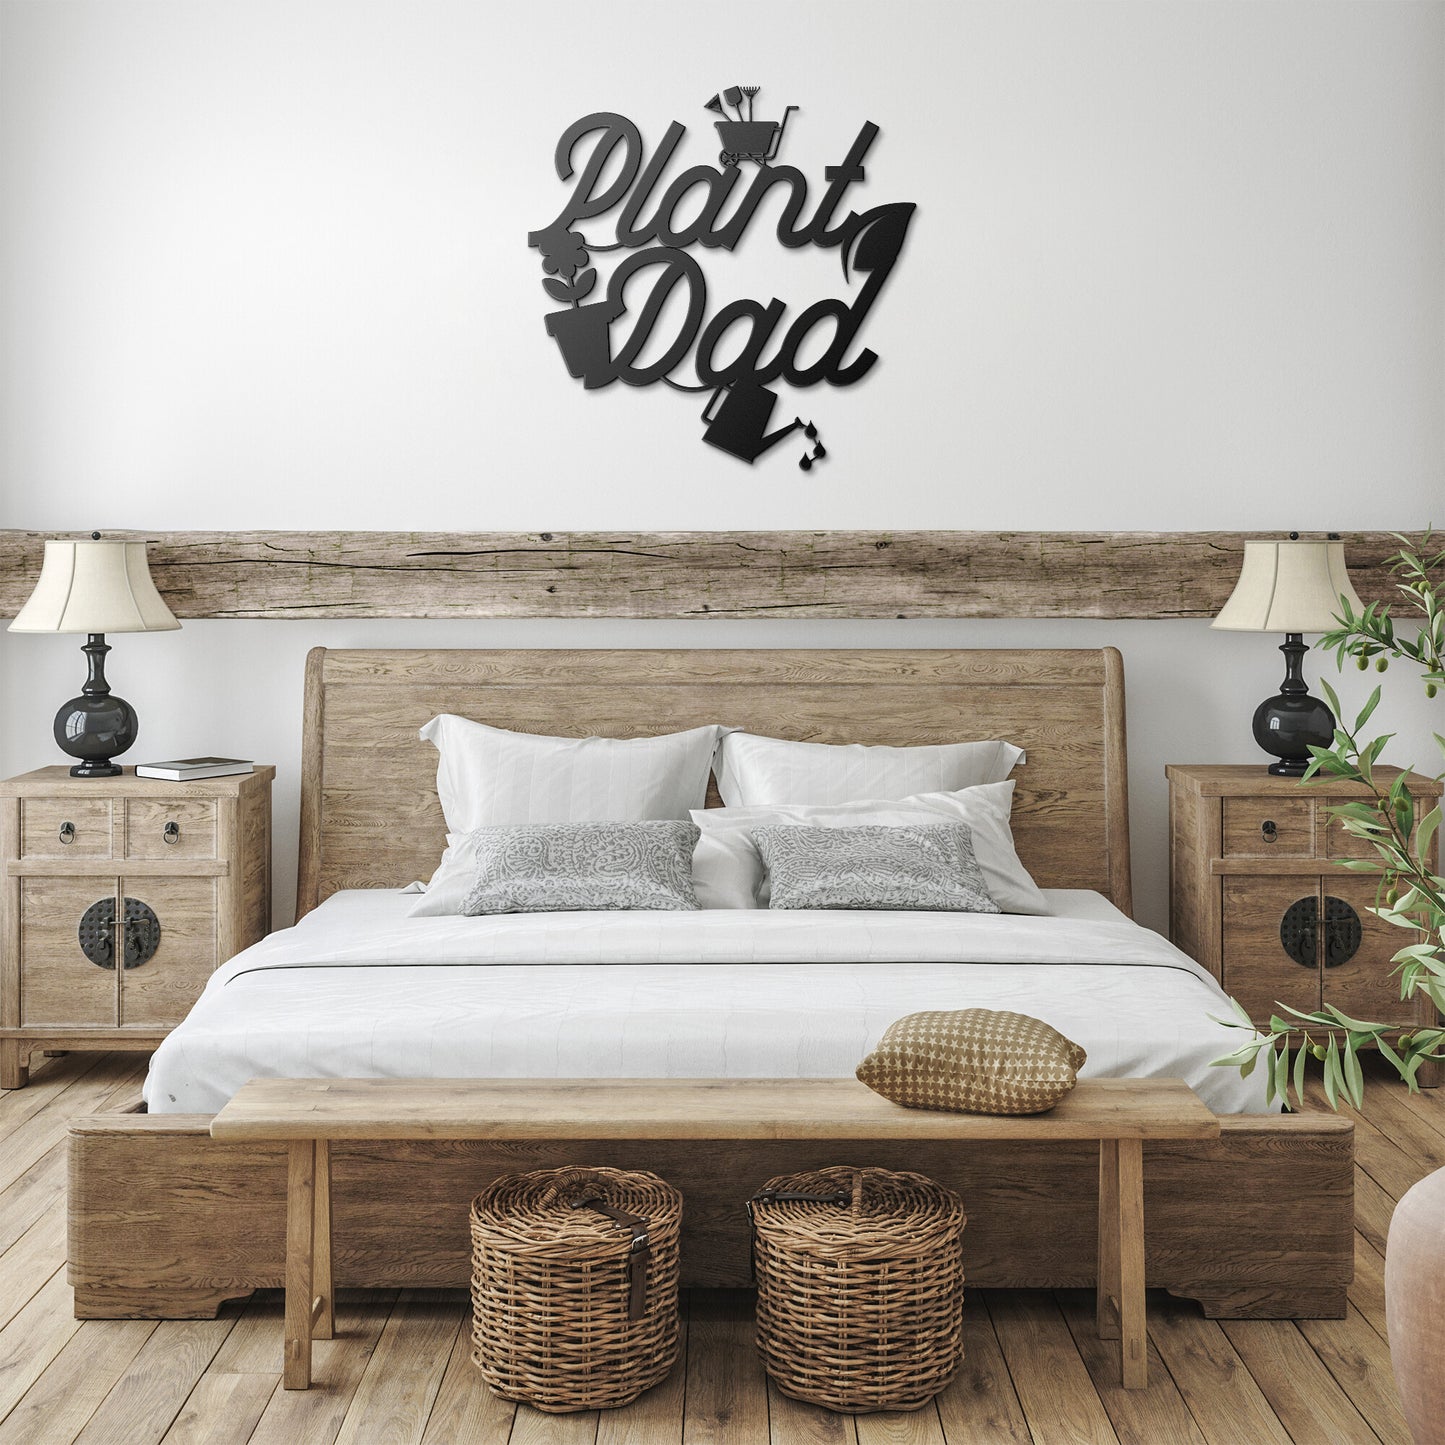 Plant Dad Gift | Plant Dad Metal Wall Art Gift | Gardener Gift for Dad |